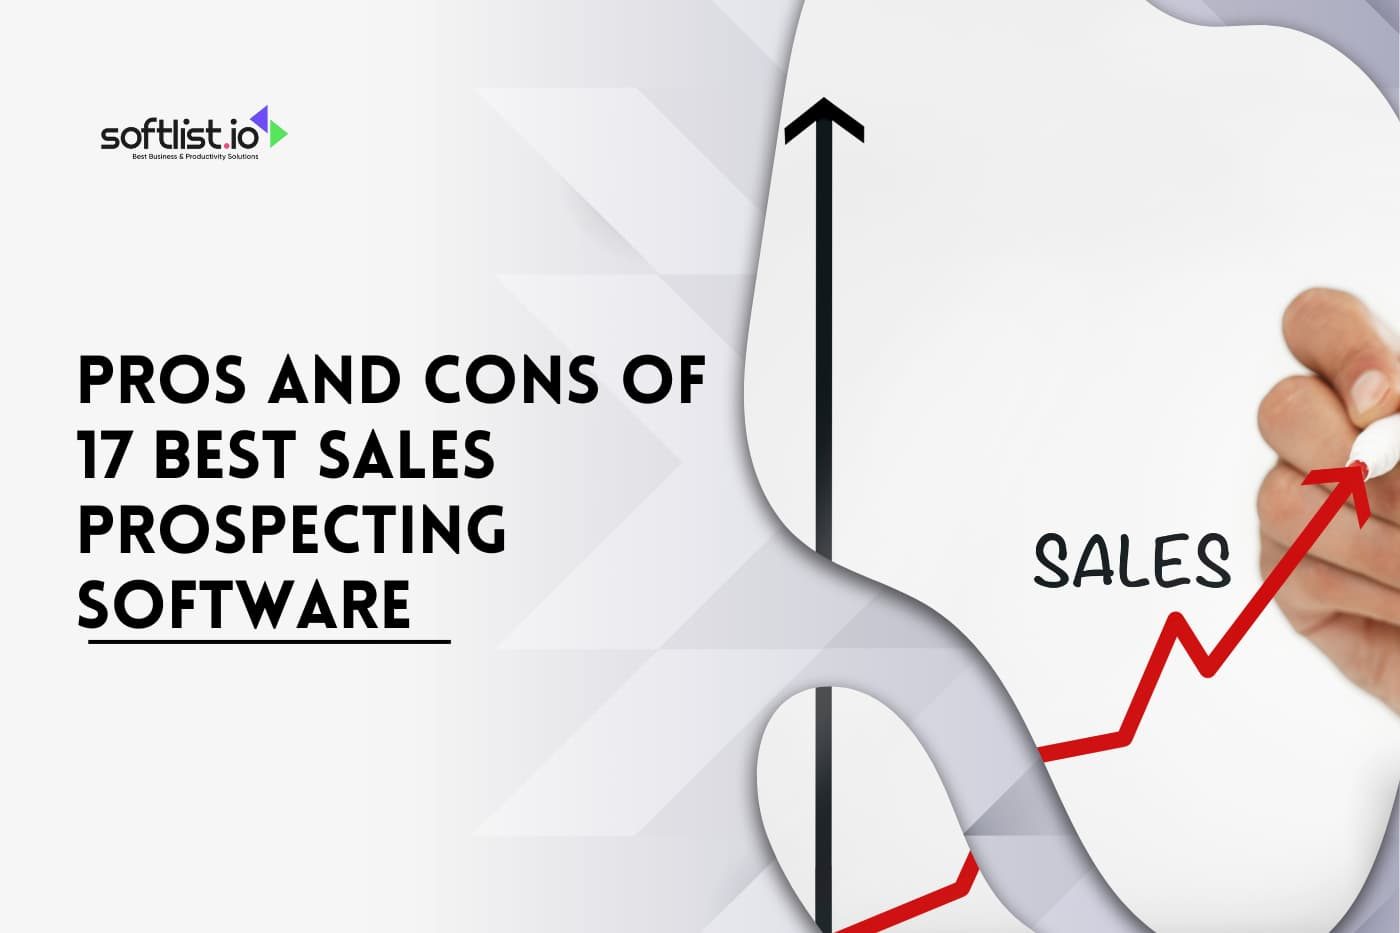 A Comprehensive Analysis Of 17 Best Sales Prospecting Software Solutions